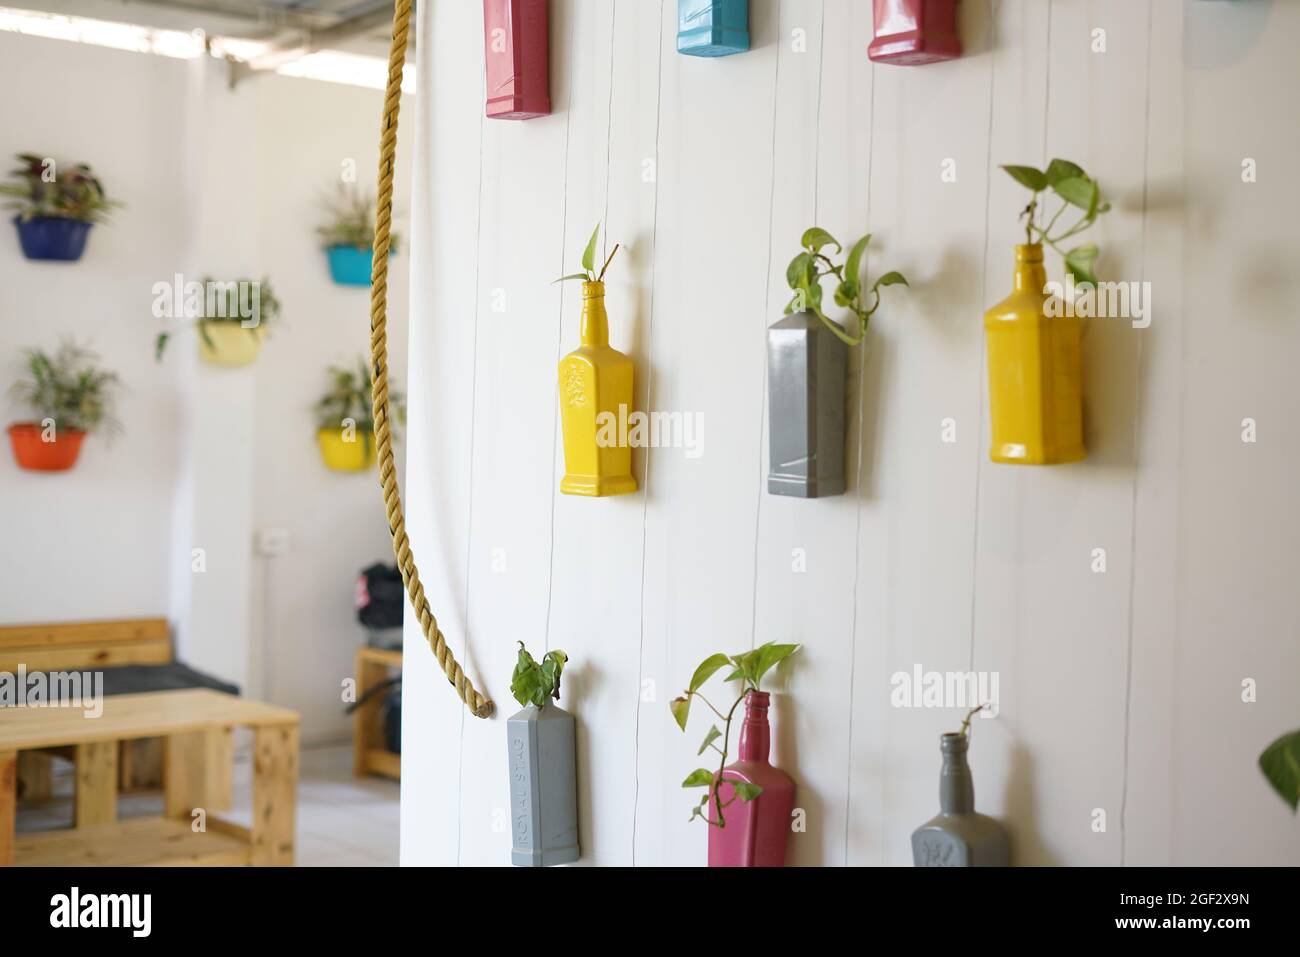 Home Décor with bottle planters of different colors on wall, Wall Decor,  Plants, India Stock Photo - Alamy